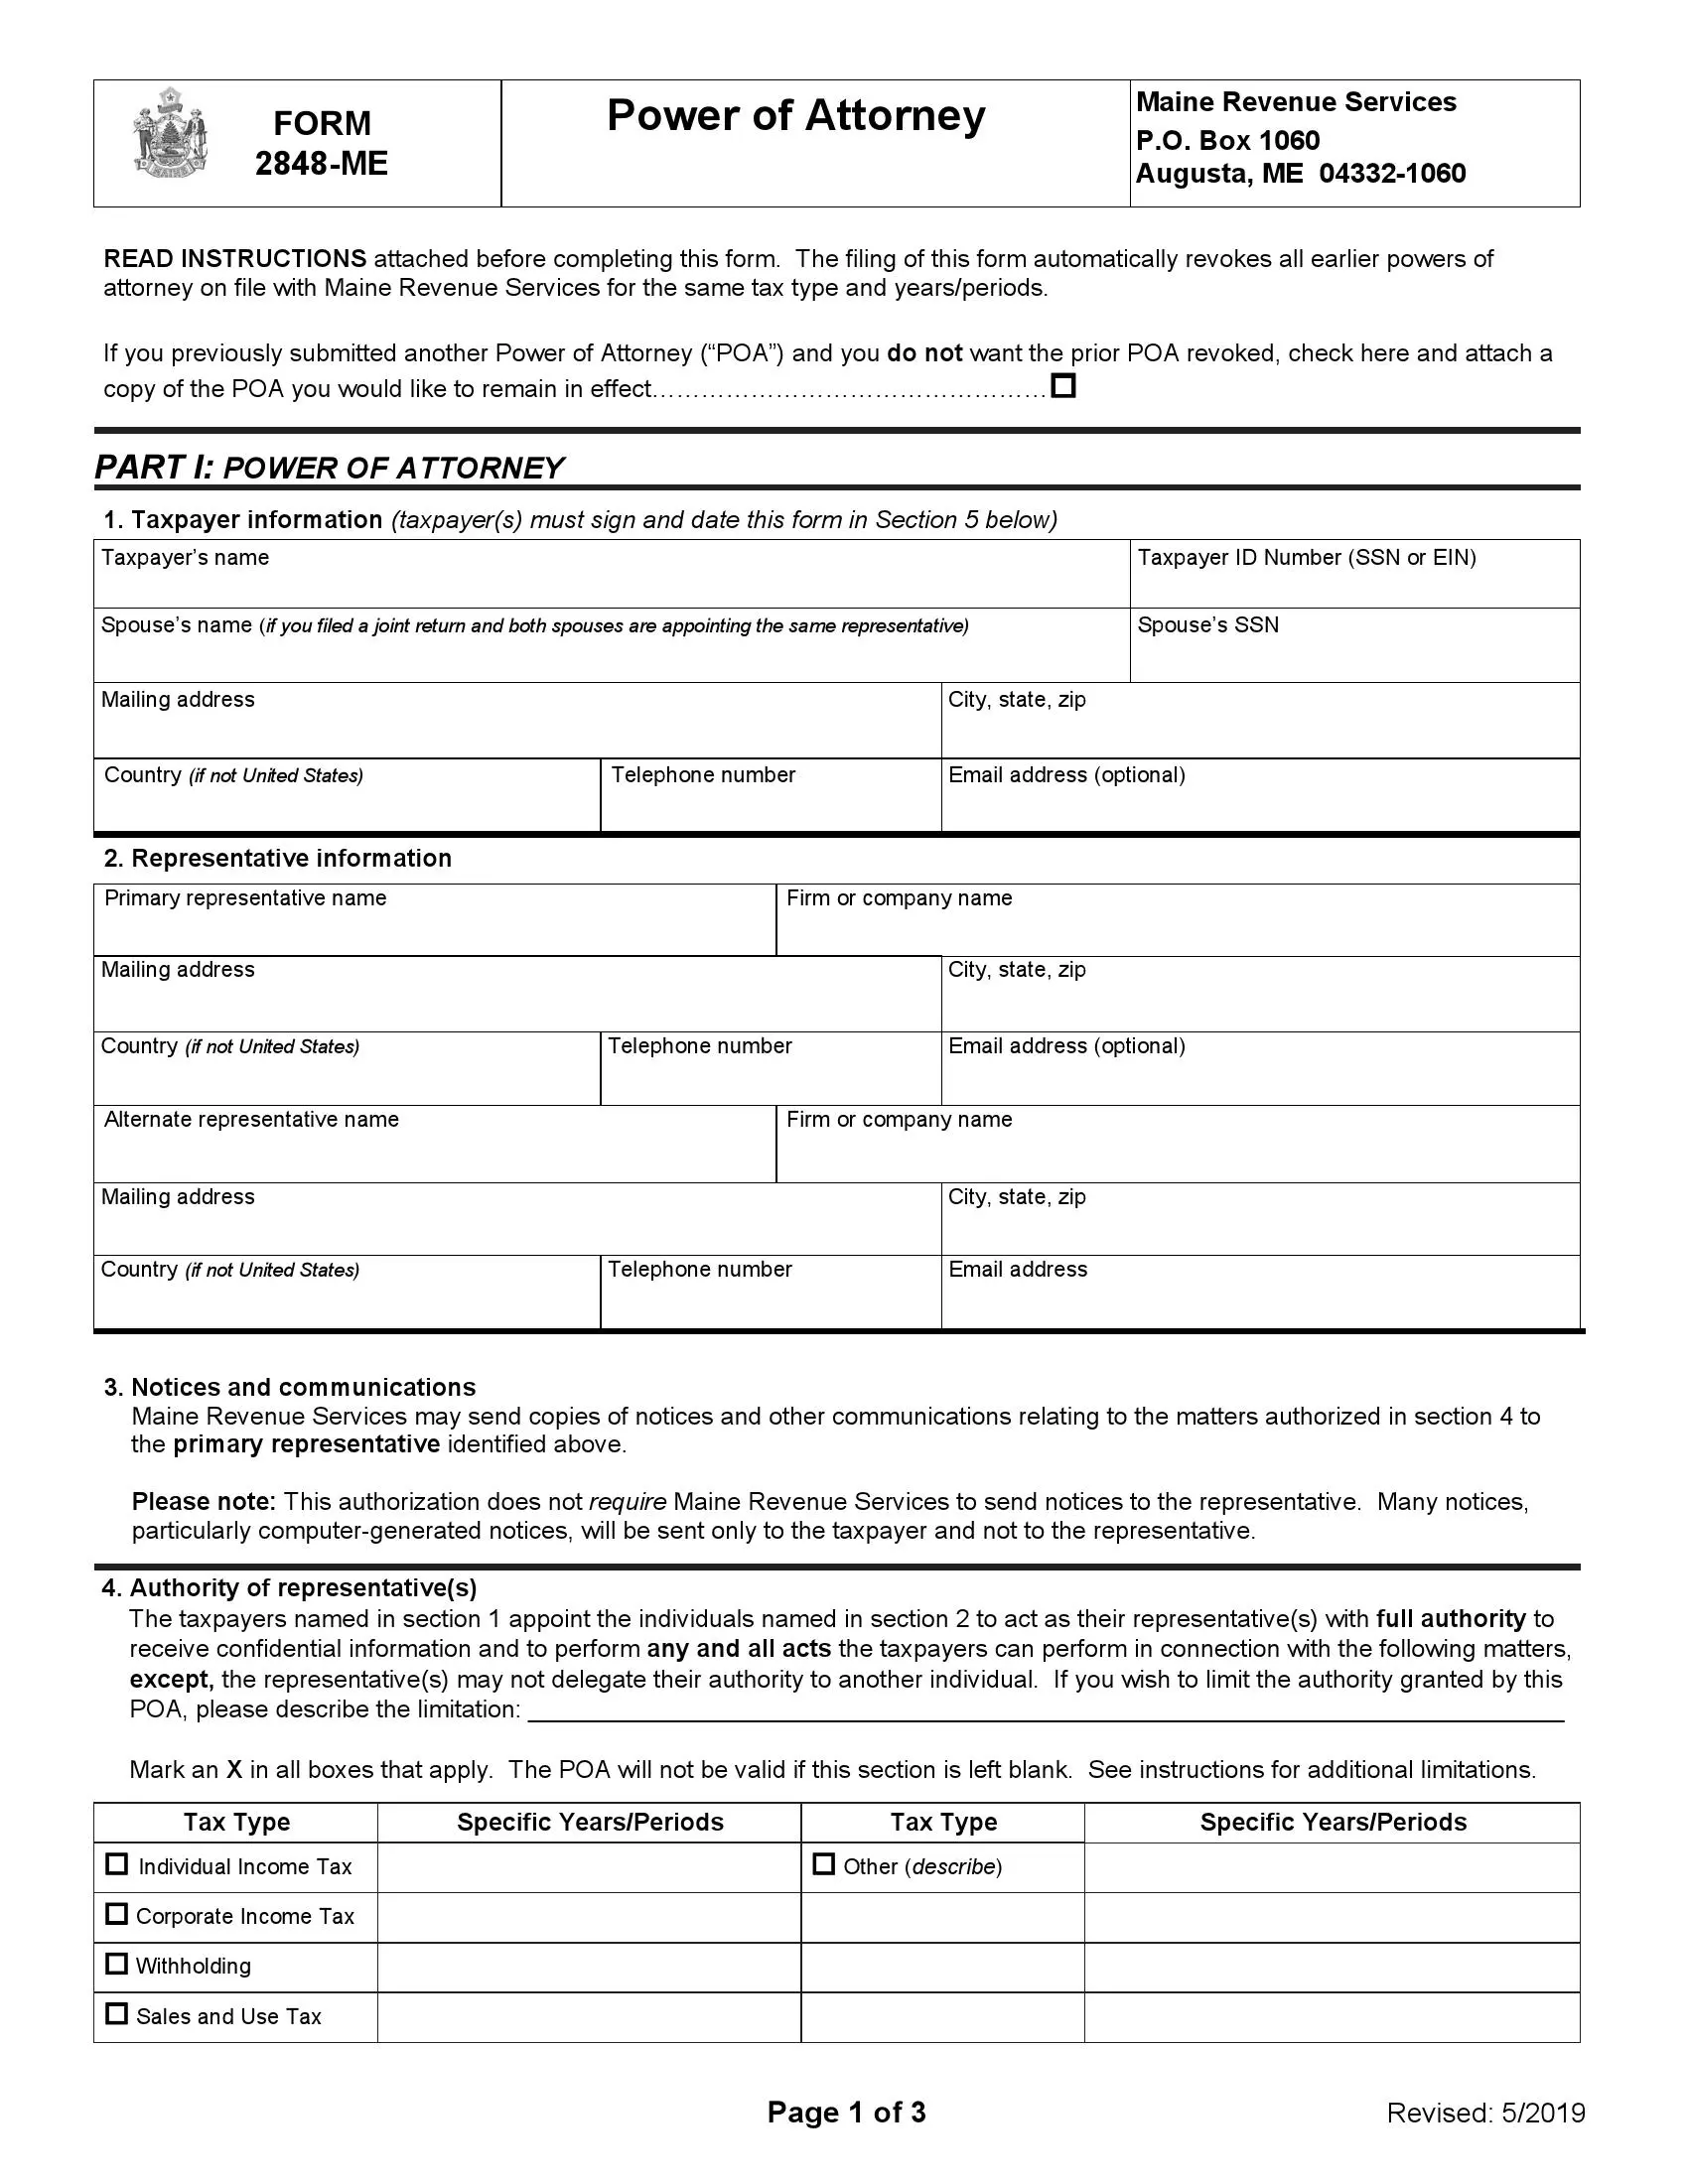 maine form 2848 me preview